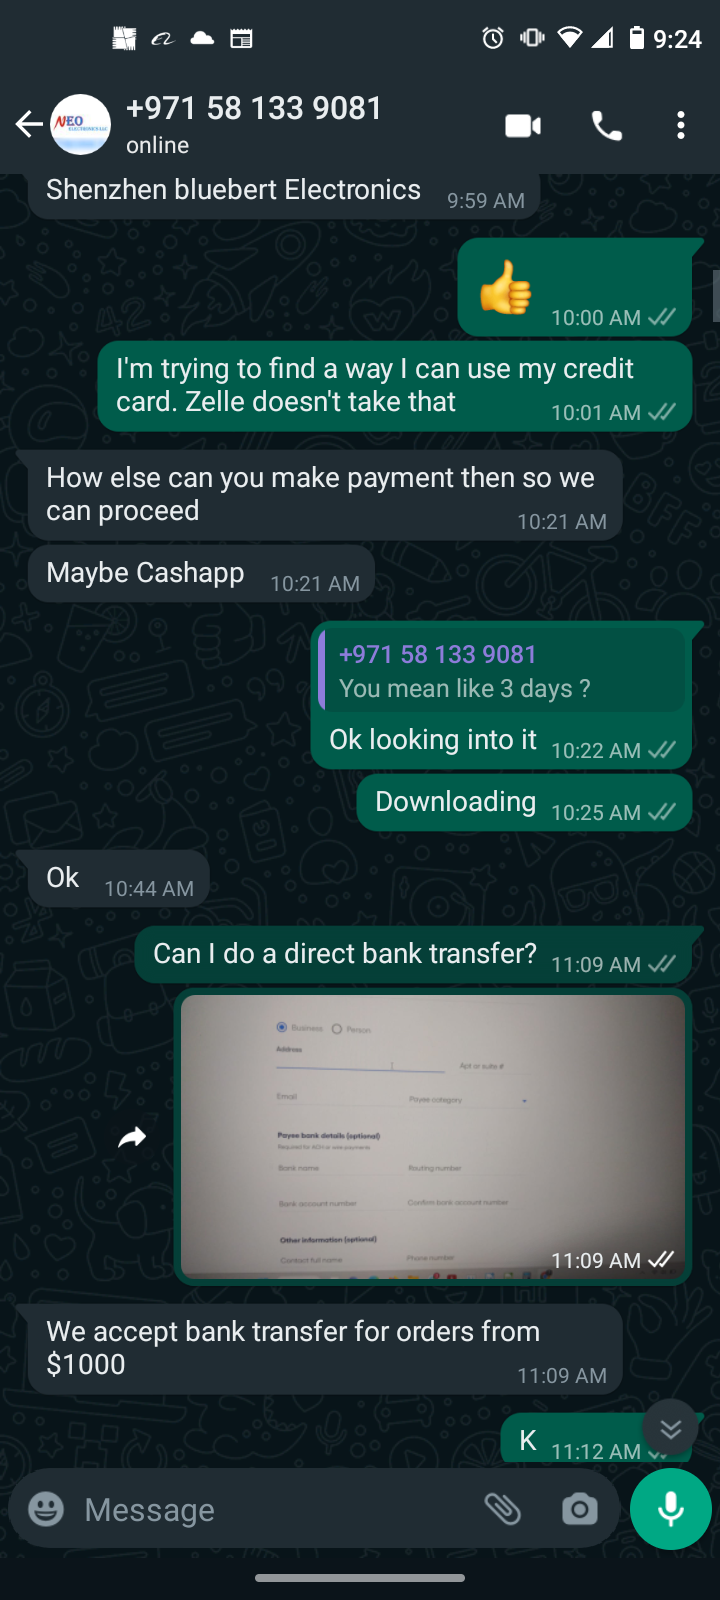 Whatsapp and Alibaba conversations with name 